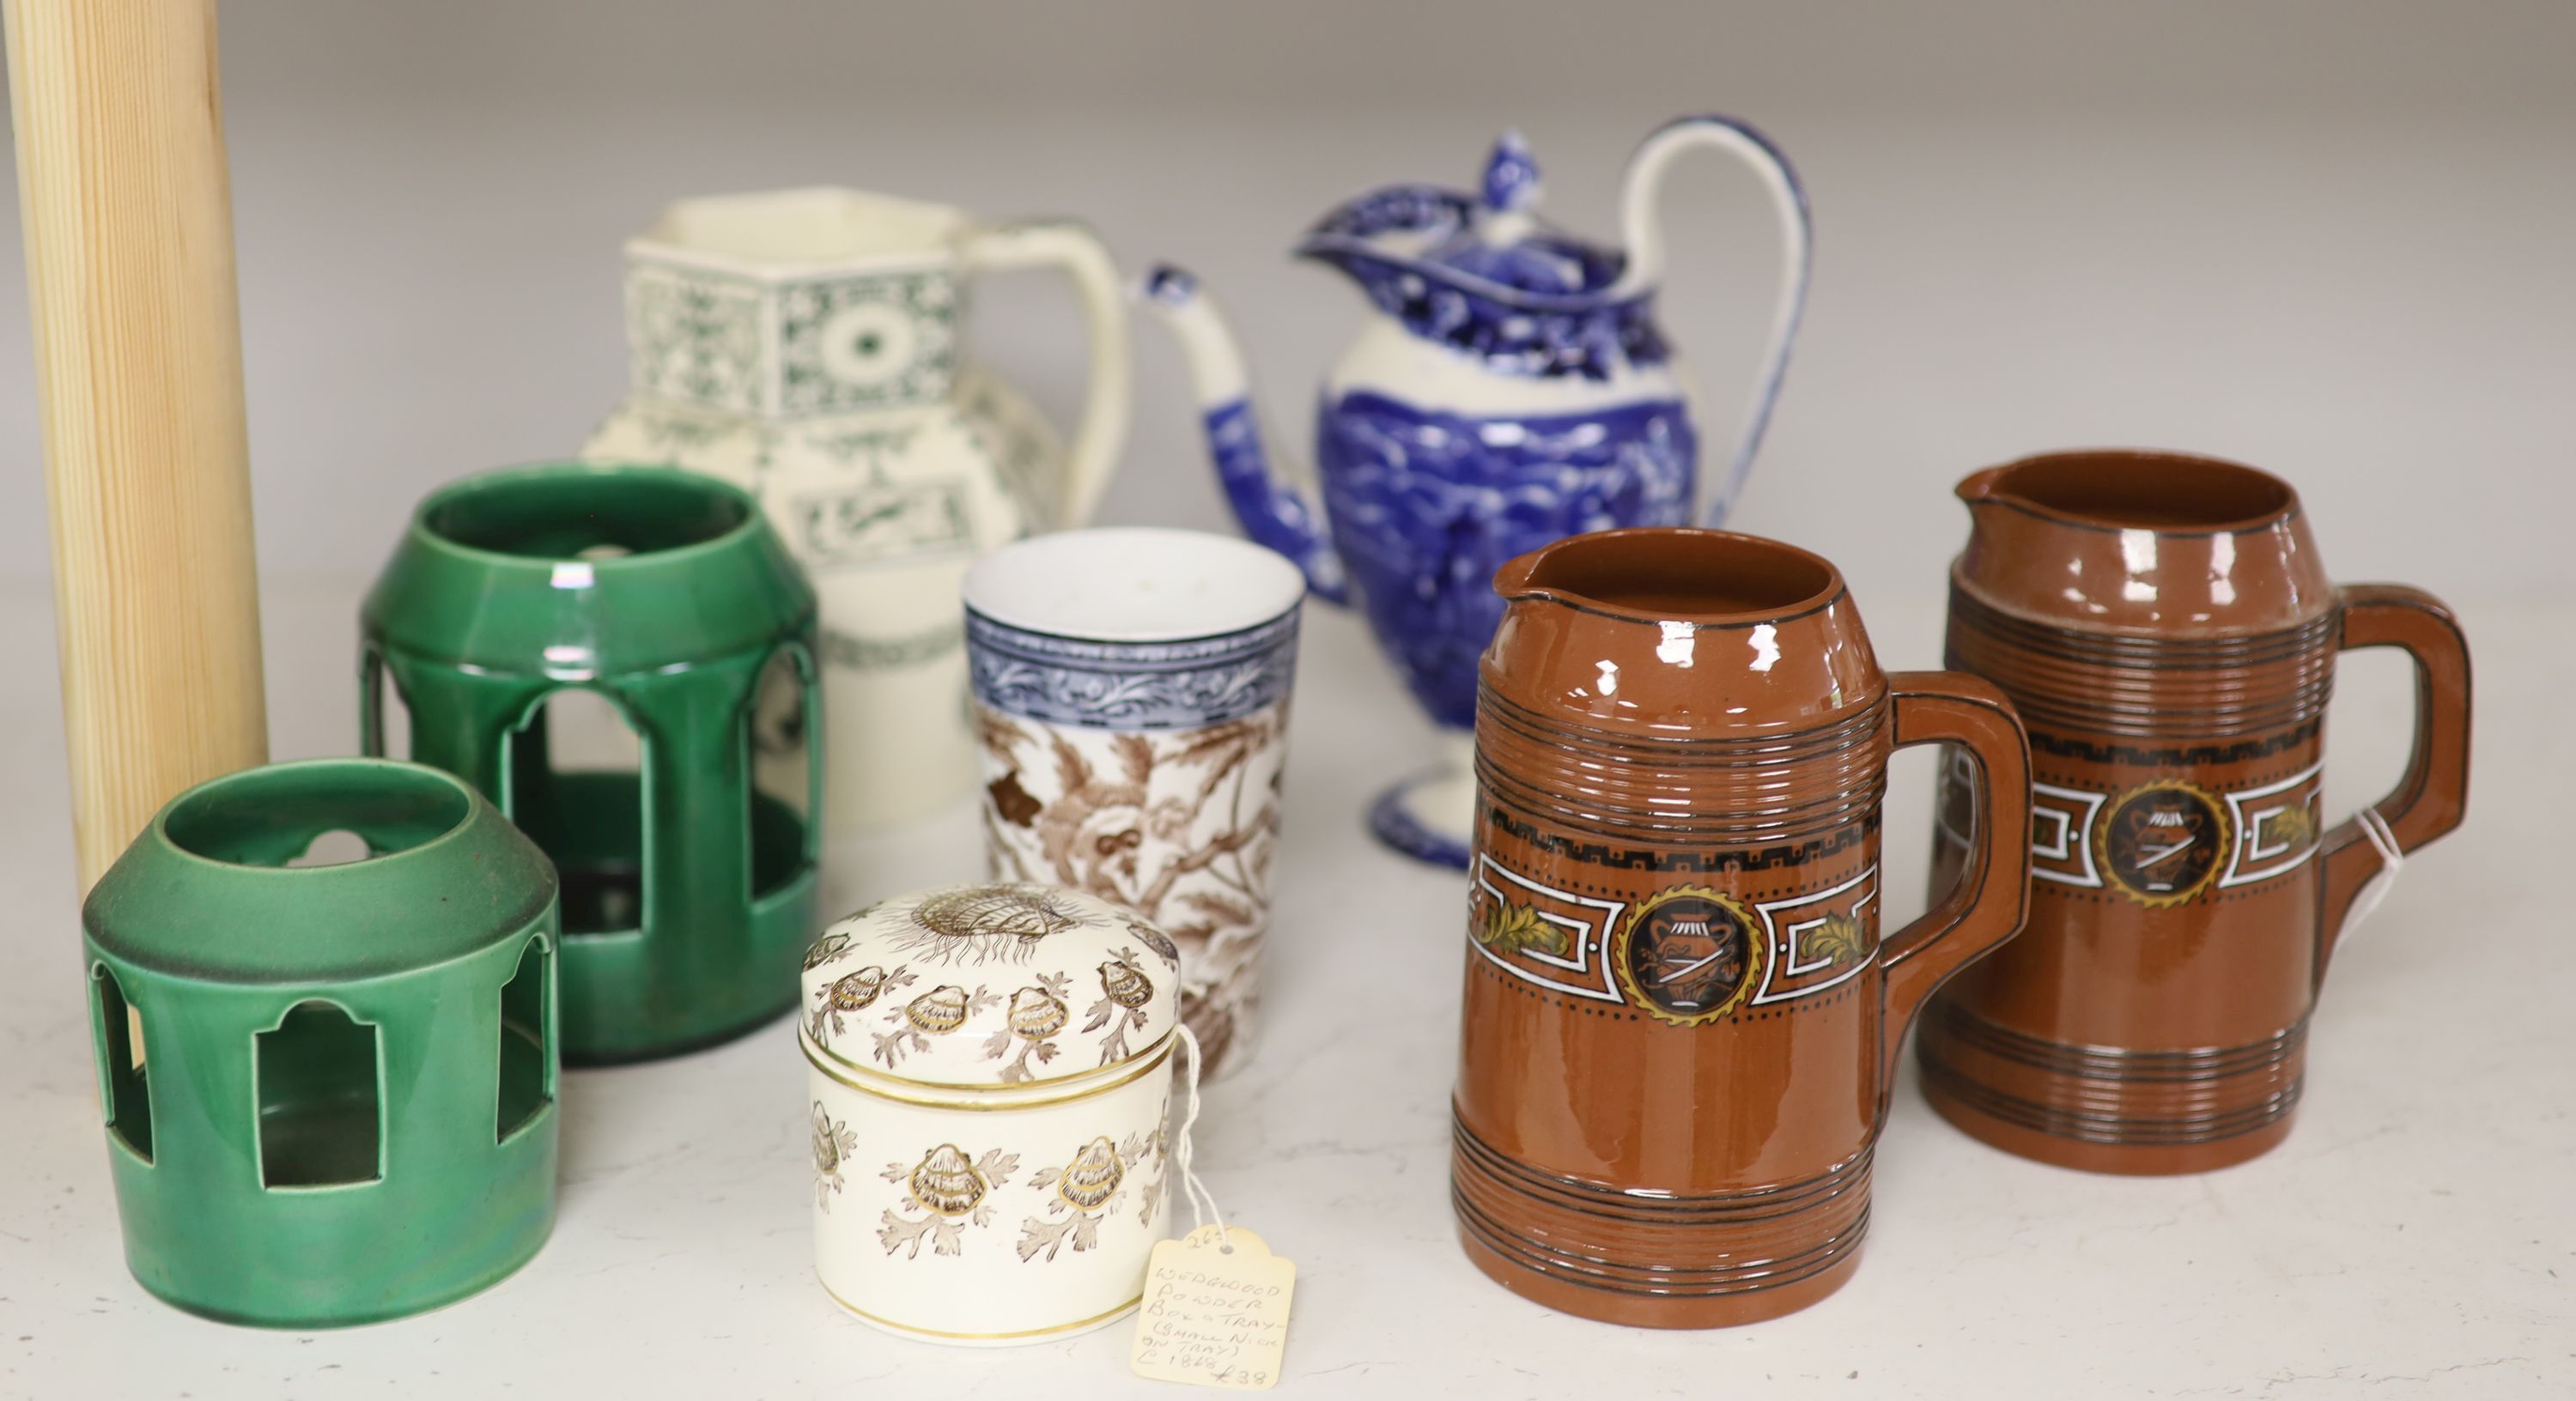 A group of 19th century Wedgwood transfer printed vessels and two Wedgwood greenware tealight holders